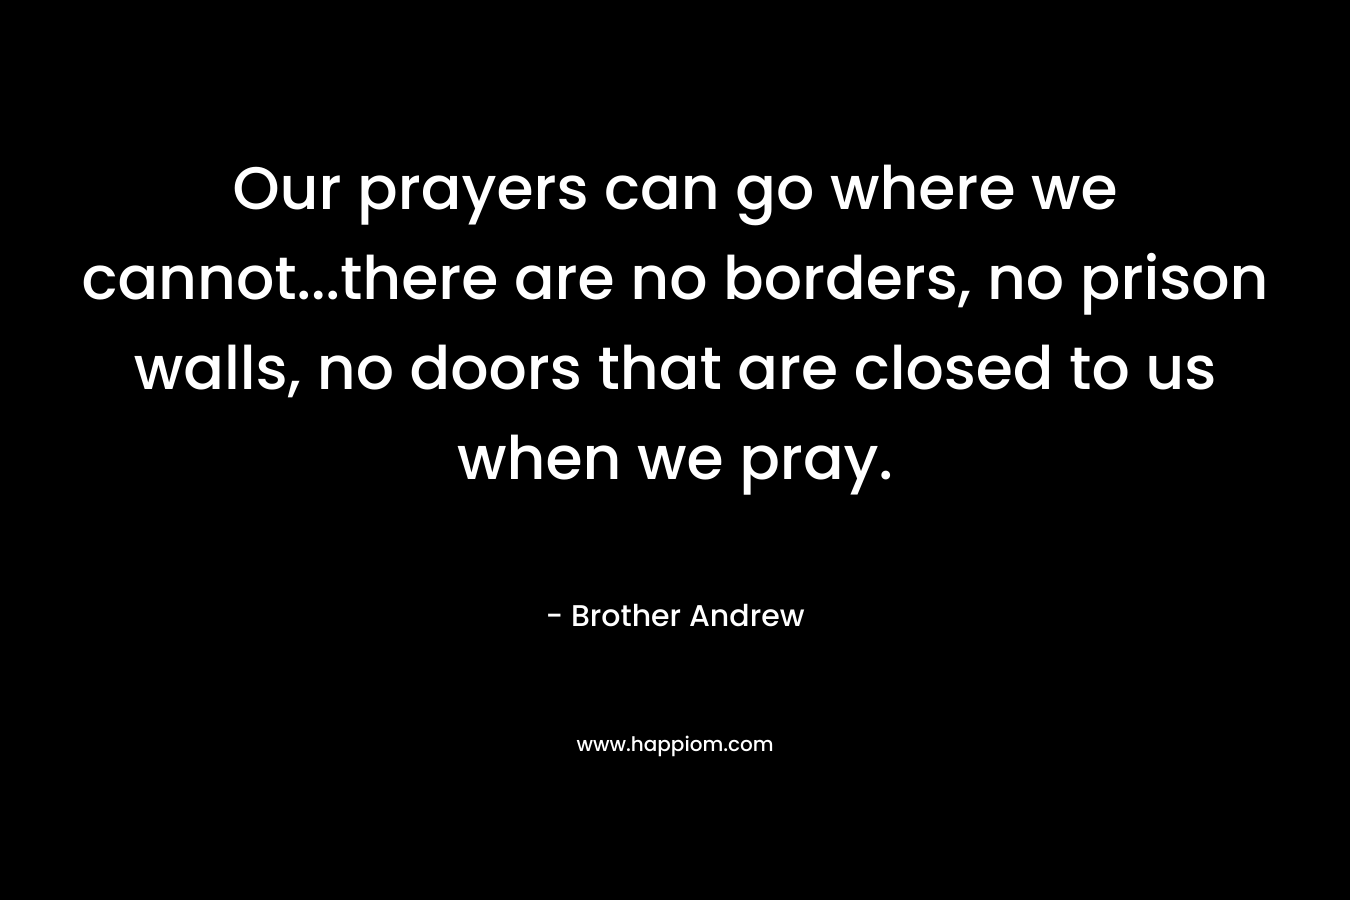 Our prayers can go where we cannot…there are no borders, no prison walls, no doors that are closed to us when we pray. – Brother Andrew